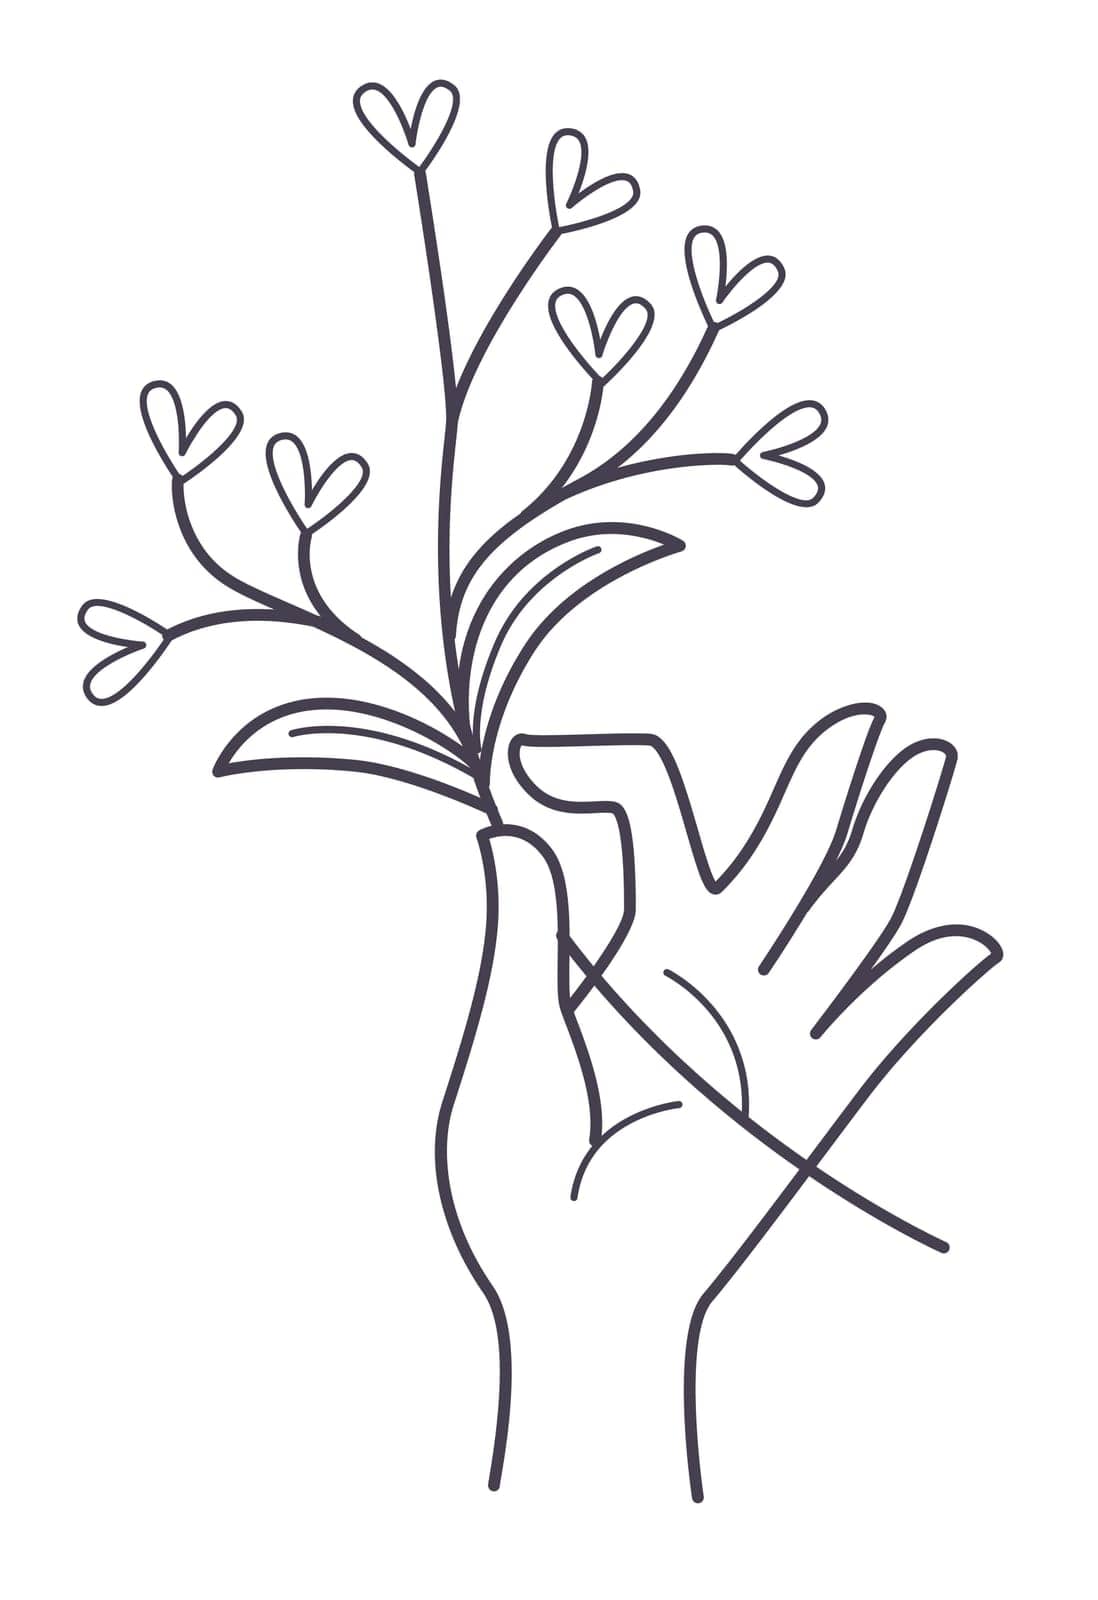 Female hand holding decorative branch with leaves, isolated minimalist icon of magic herb or flower. Vintage witchcraft symbol, amulet of healing botanical plant. Colorless line art, vector in flat